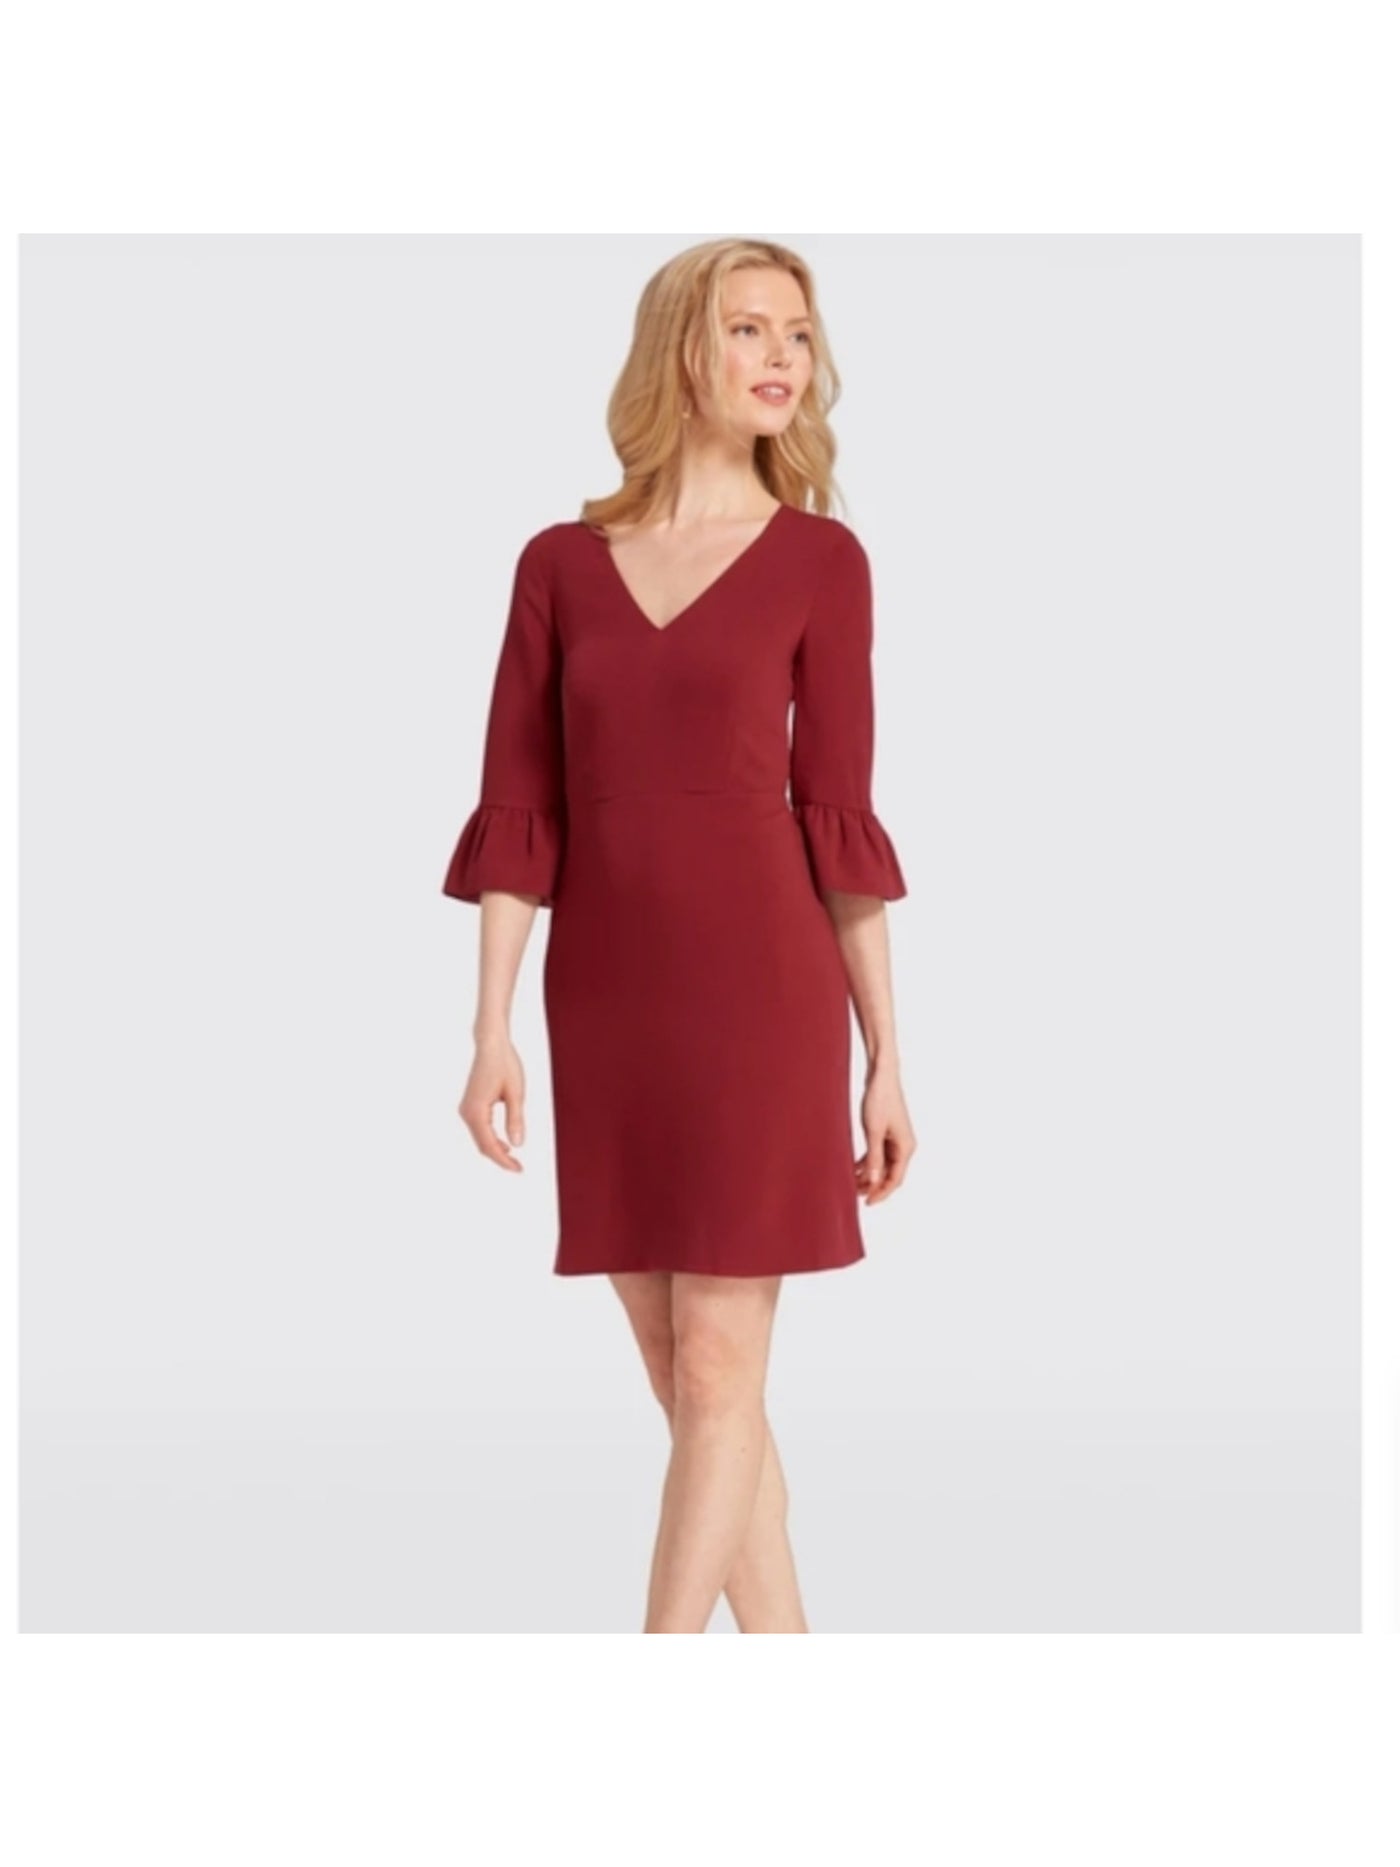 DKNY Womens Red Stretch Zippered Darted Ruffled Tiered Sleeve Scuba Crep 3/4 Sleeve V Neck Above The Knee Wear To Work Sheath Dress 4